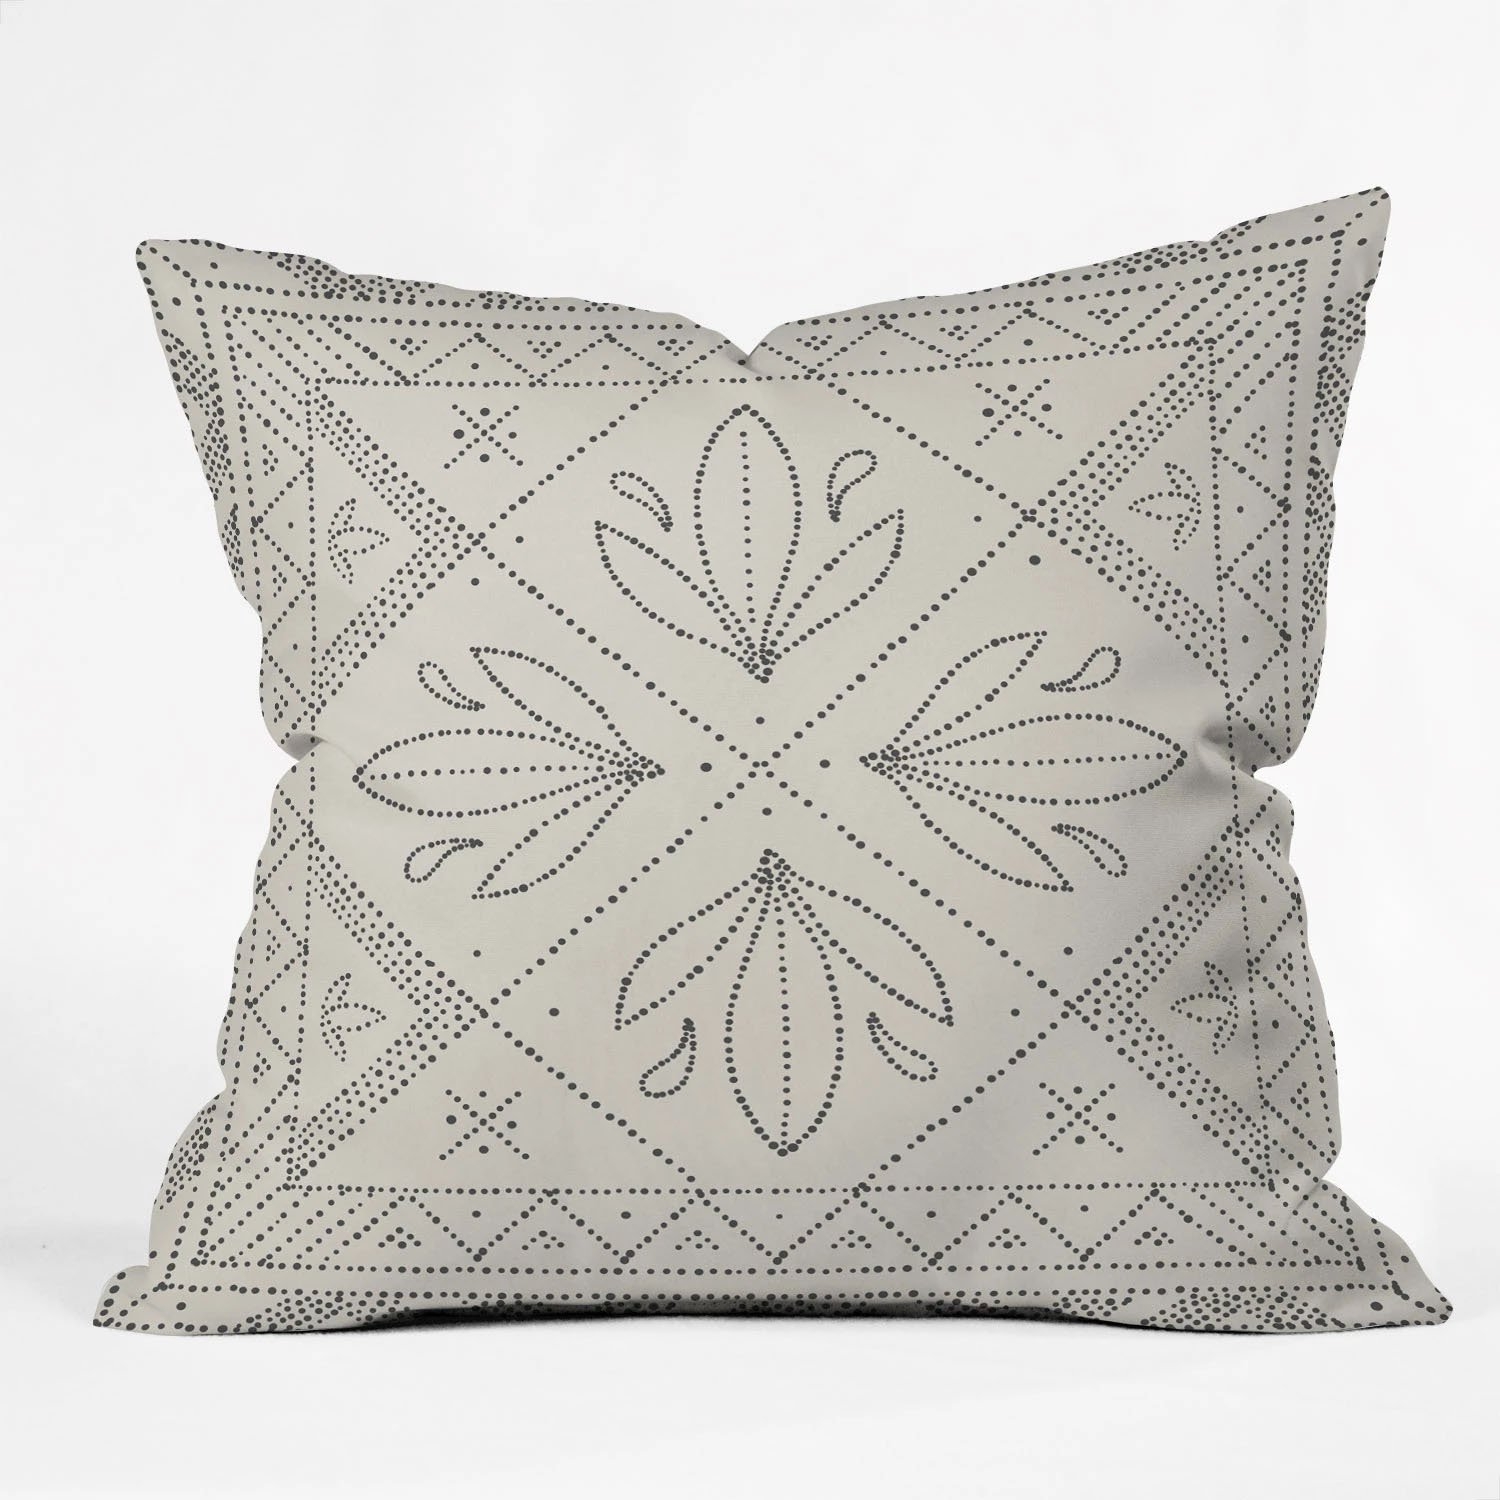 OUTDOOR THROW PILLOW JANELLE CREAM  BY IVETA ABOLINA - Image 0